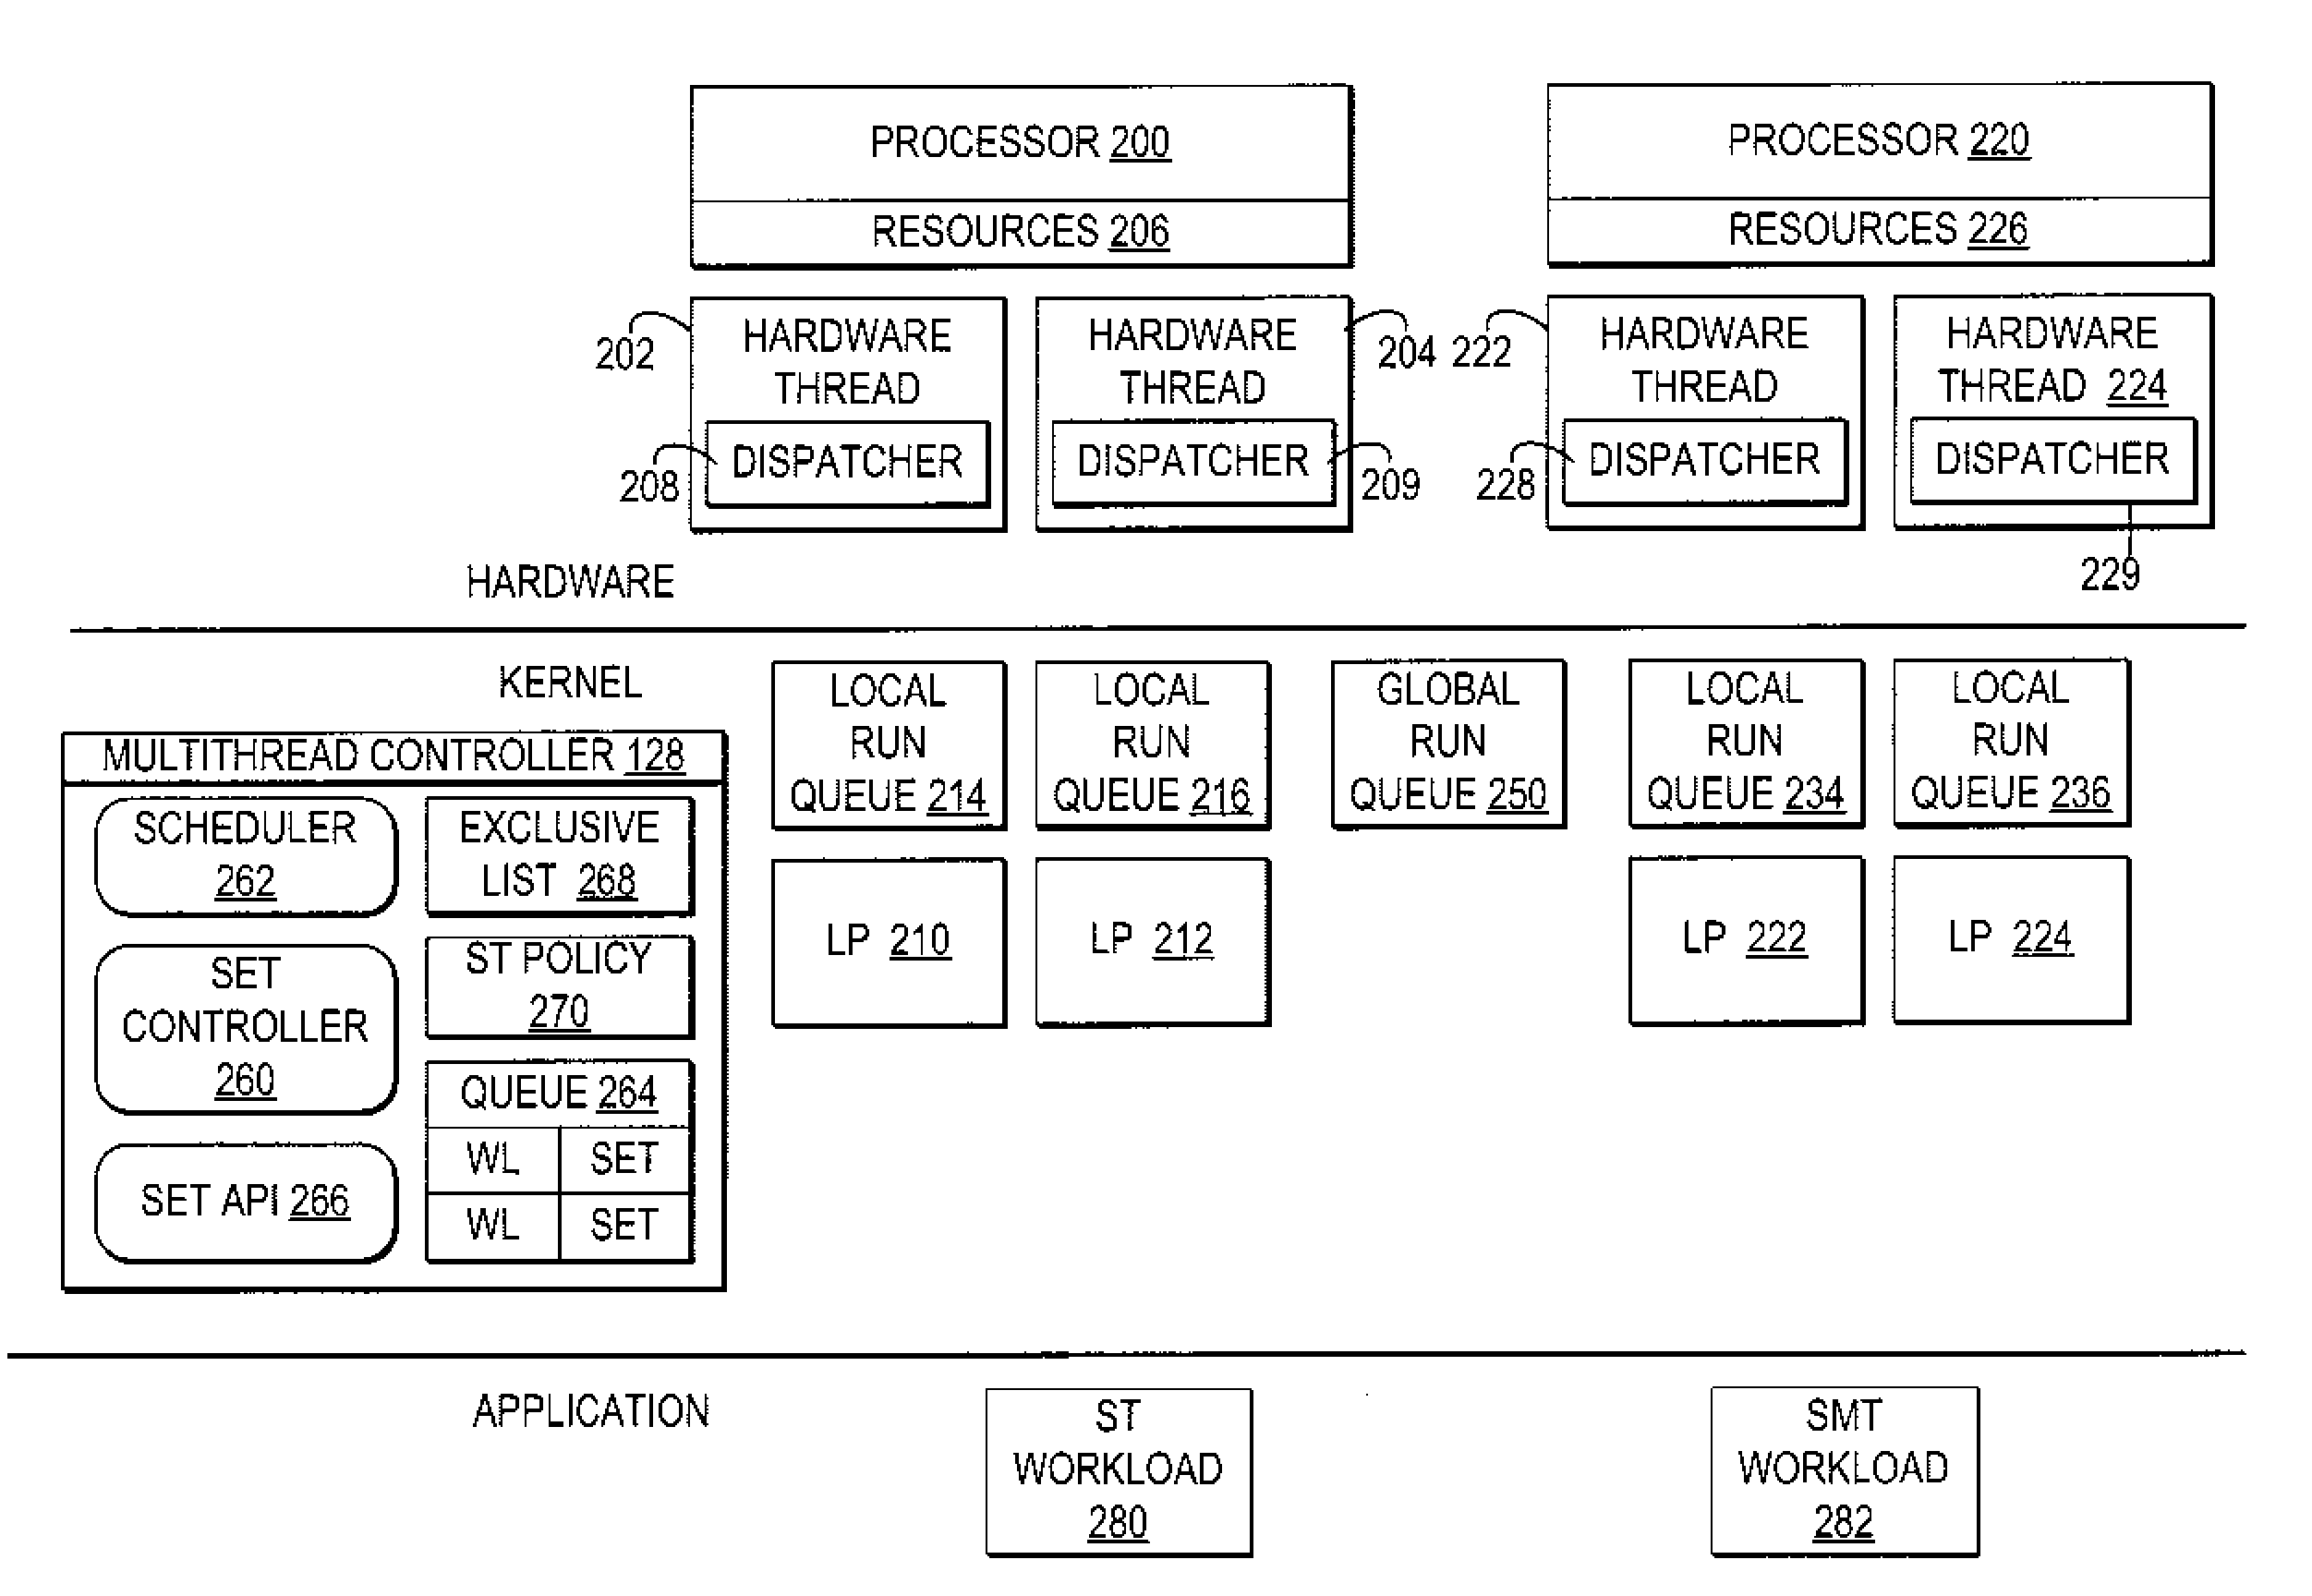 Managing execution of mixed workloads in a simultaneous multi-threaded (SMT) enabled system